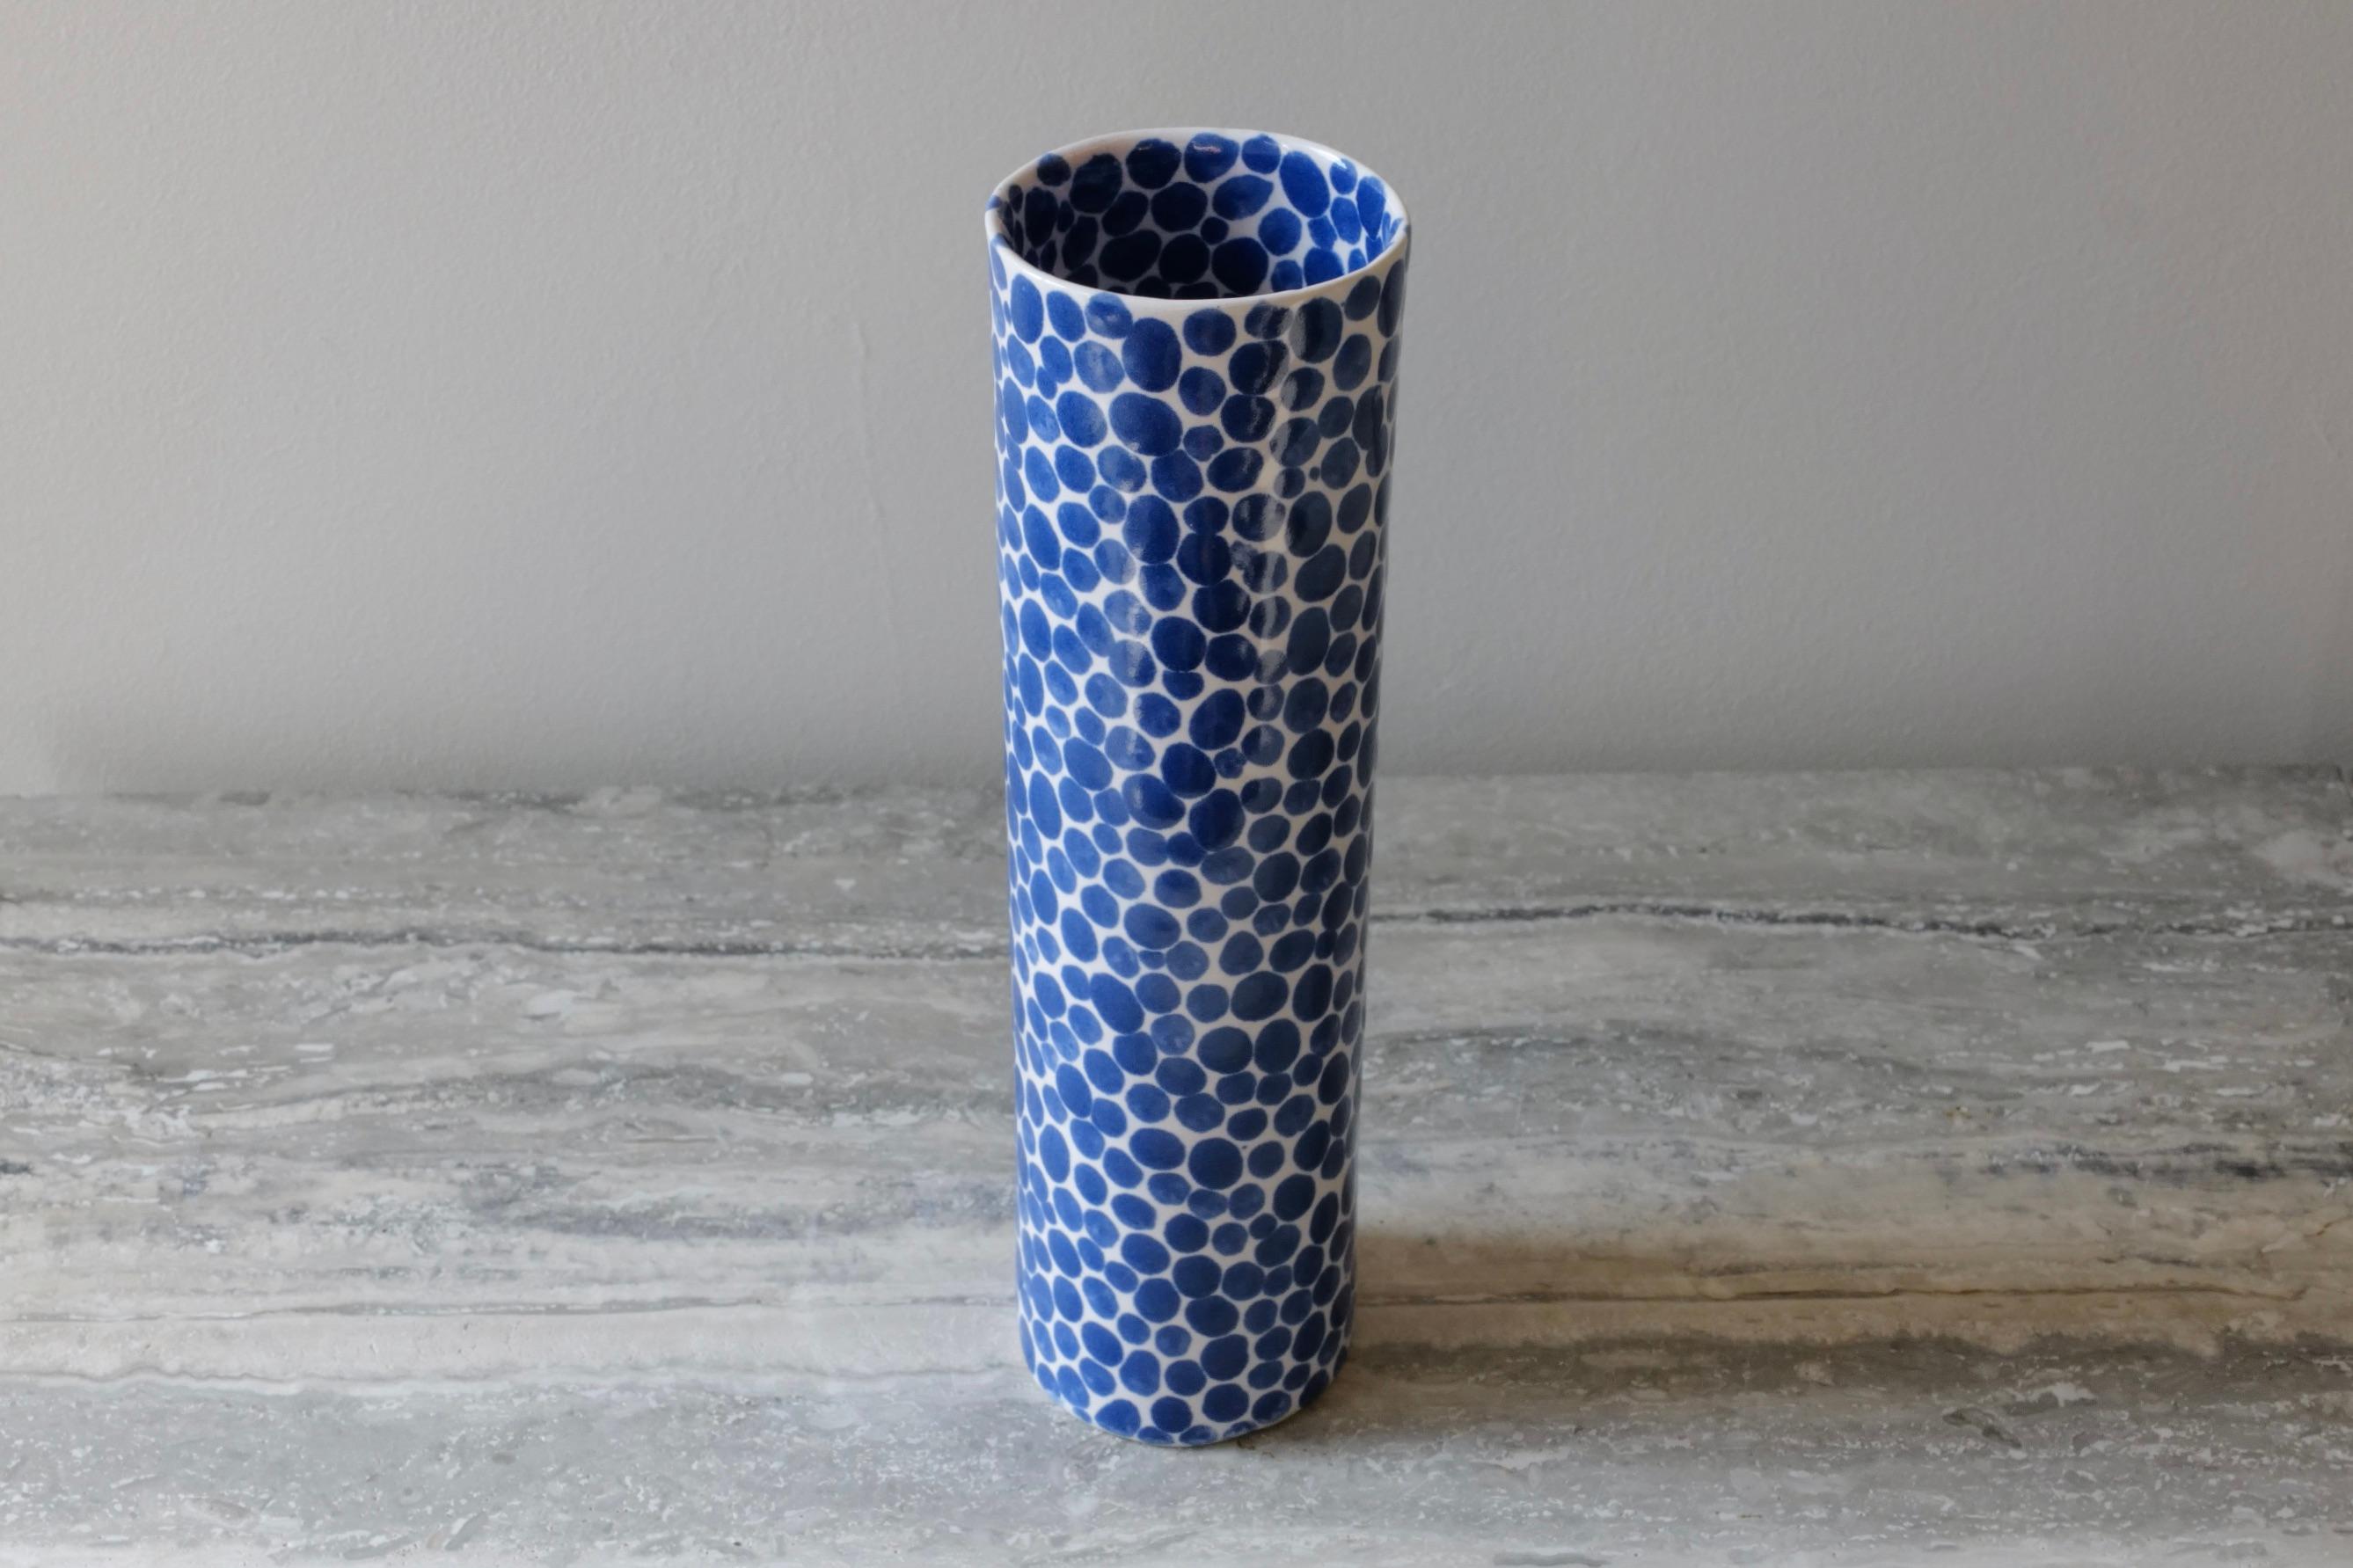 Tall, thin and elegant ceramic vase. Hand-cast in porcelain and once bisque fired, each dot is hand-painted with a traditional cobalt blue glaze. An unconventional layered glazing technique, developed by the artist, is used in these cast porcelain